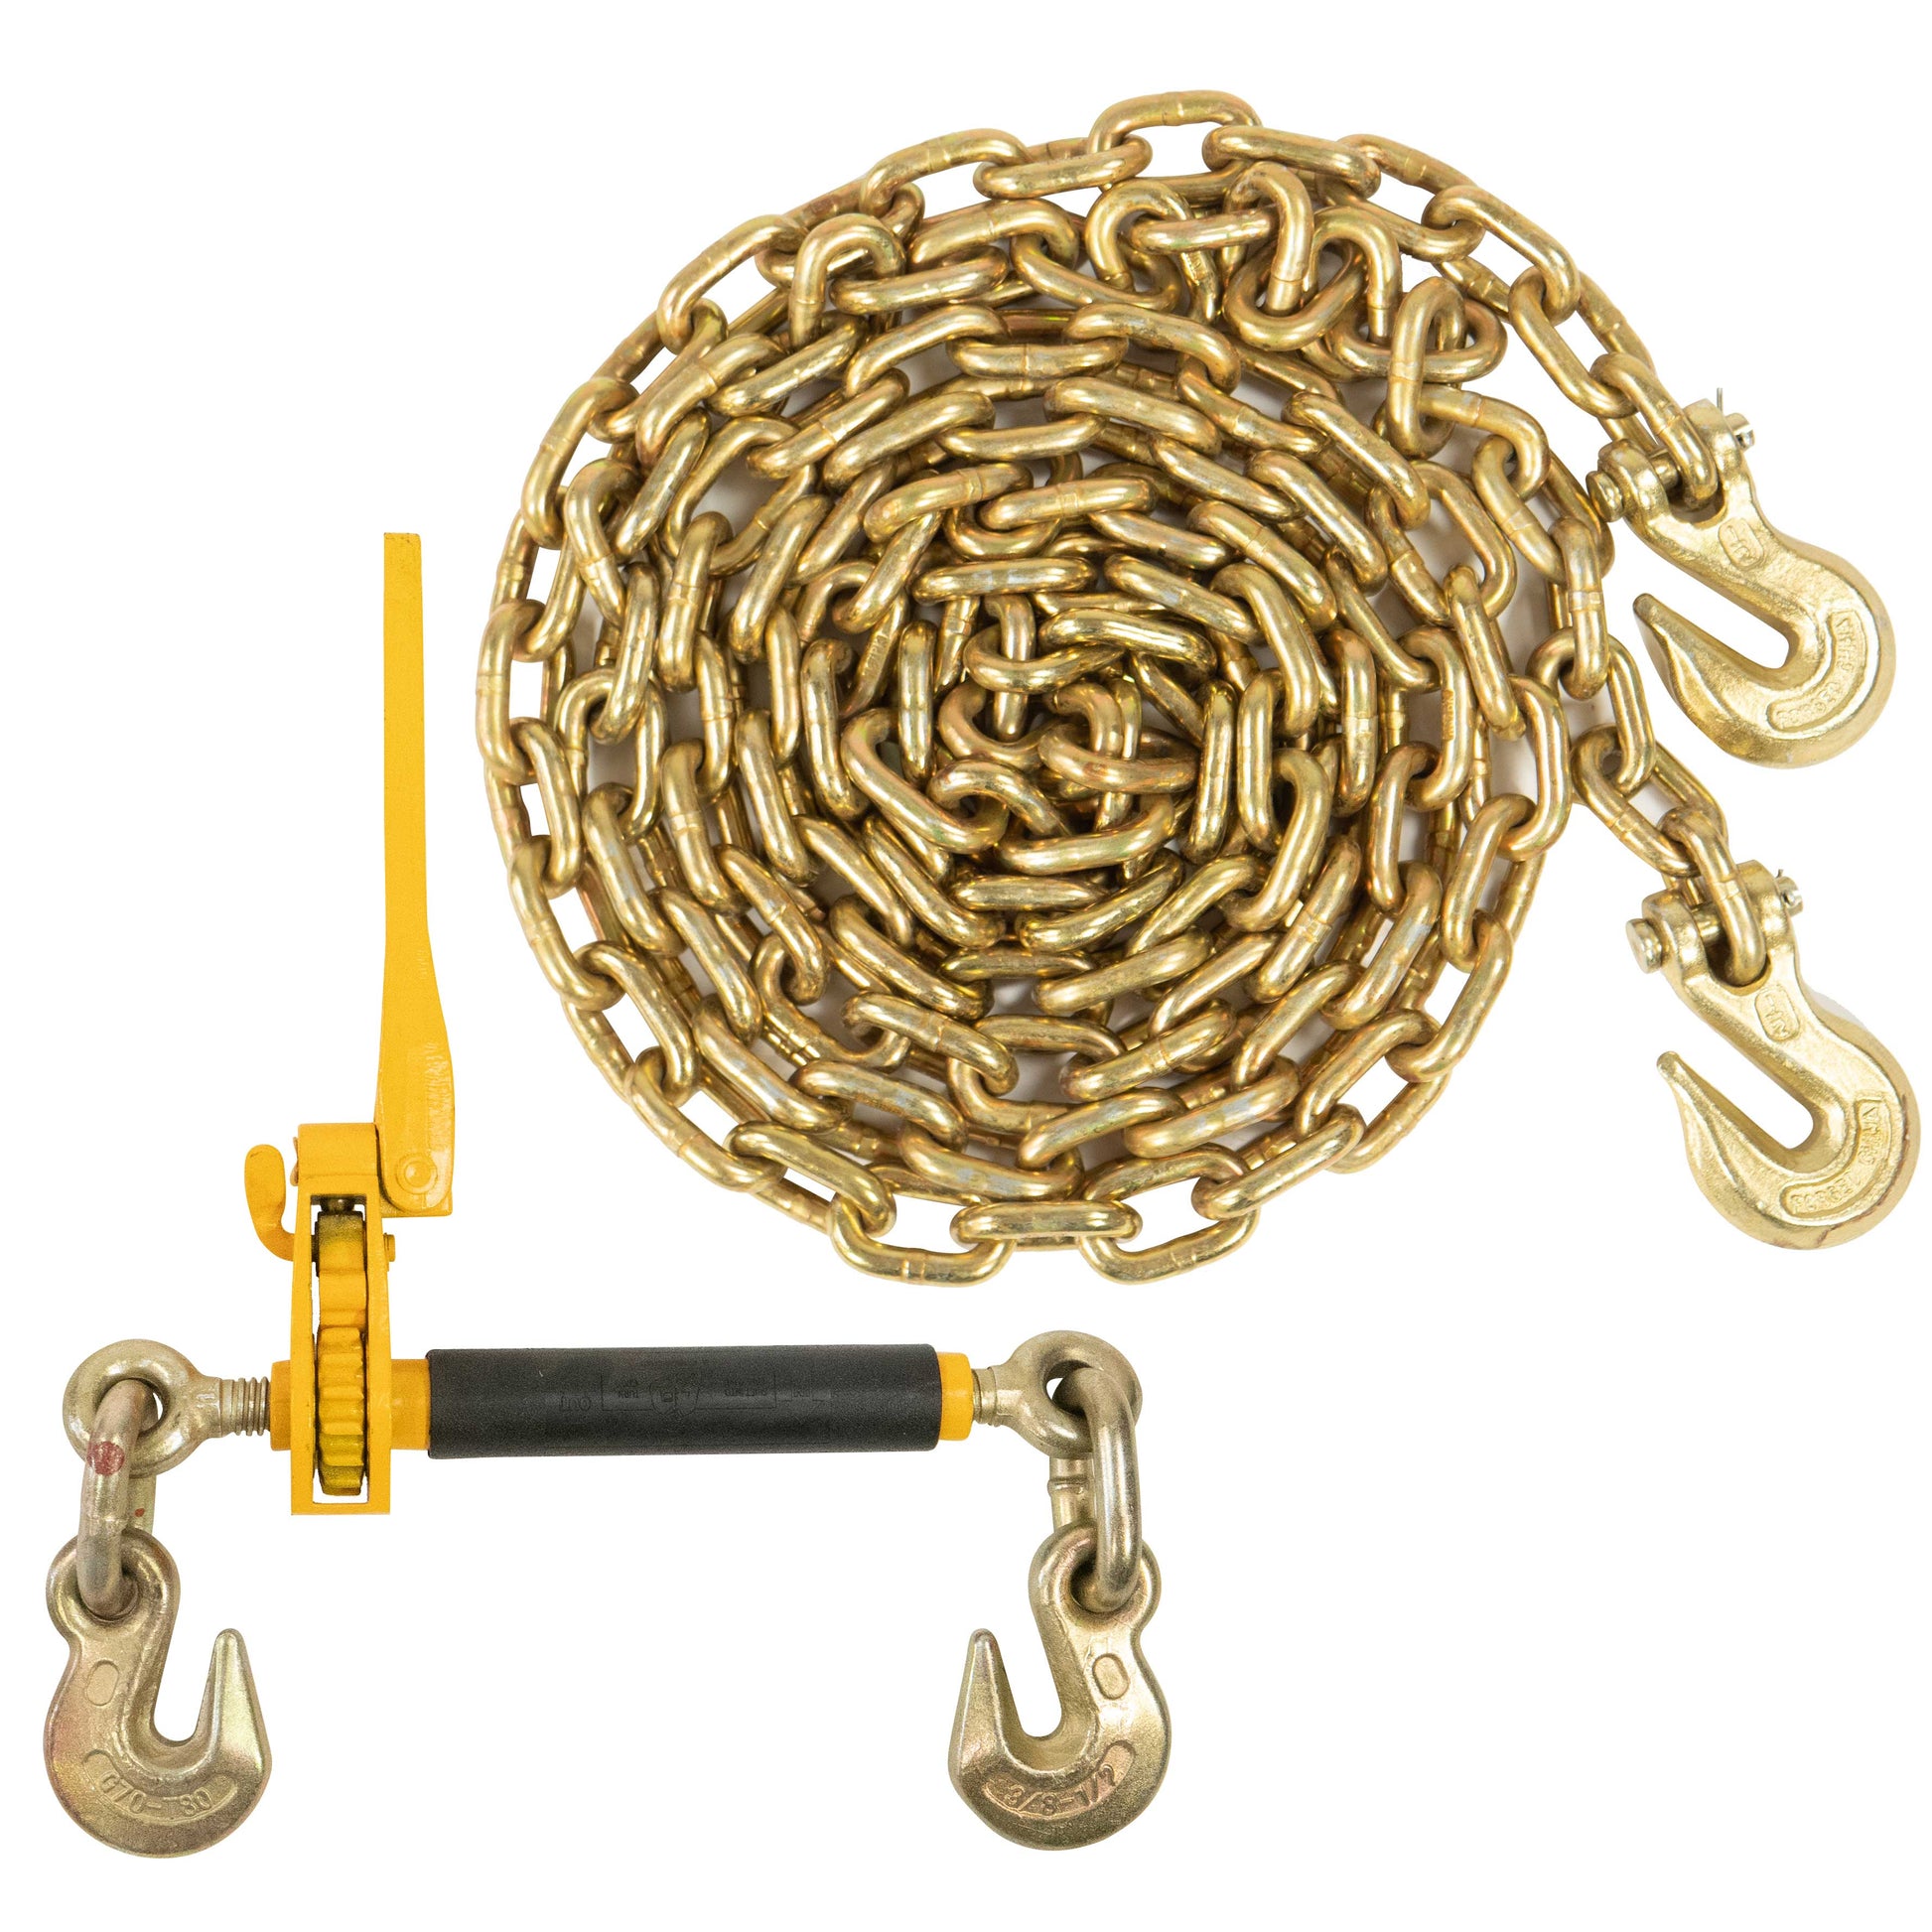 Grade 70 12 inch x 20 foot Peerless Chain and Binder Kit image 1 of 8